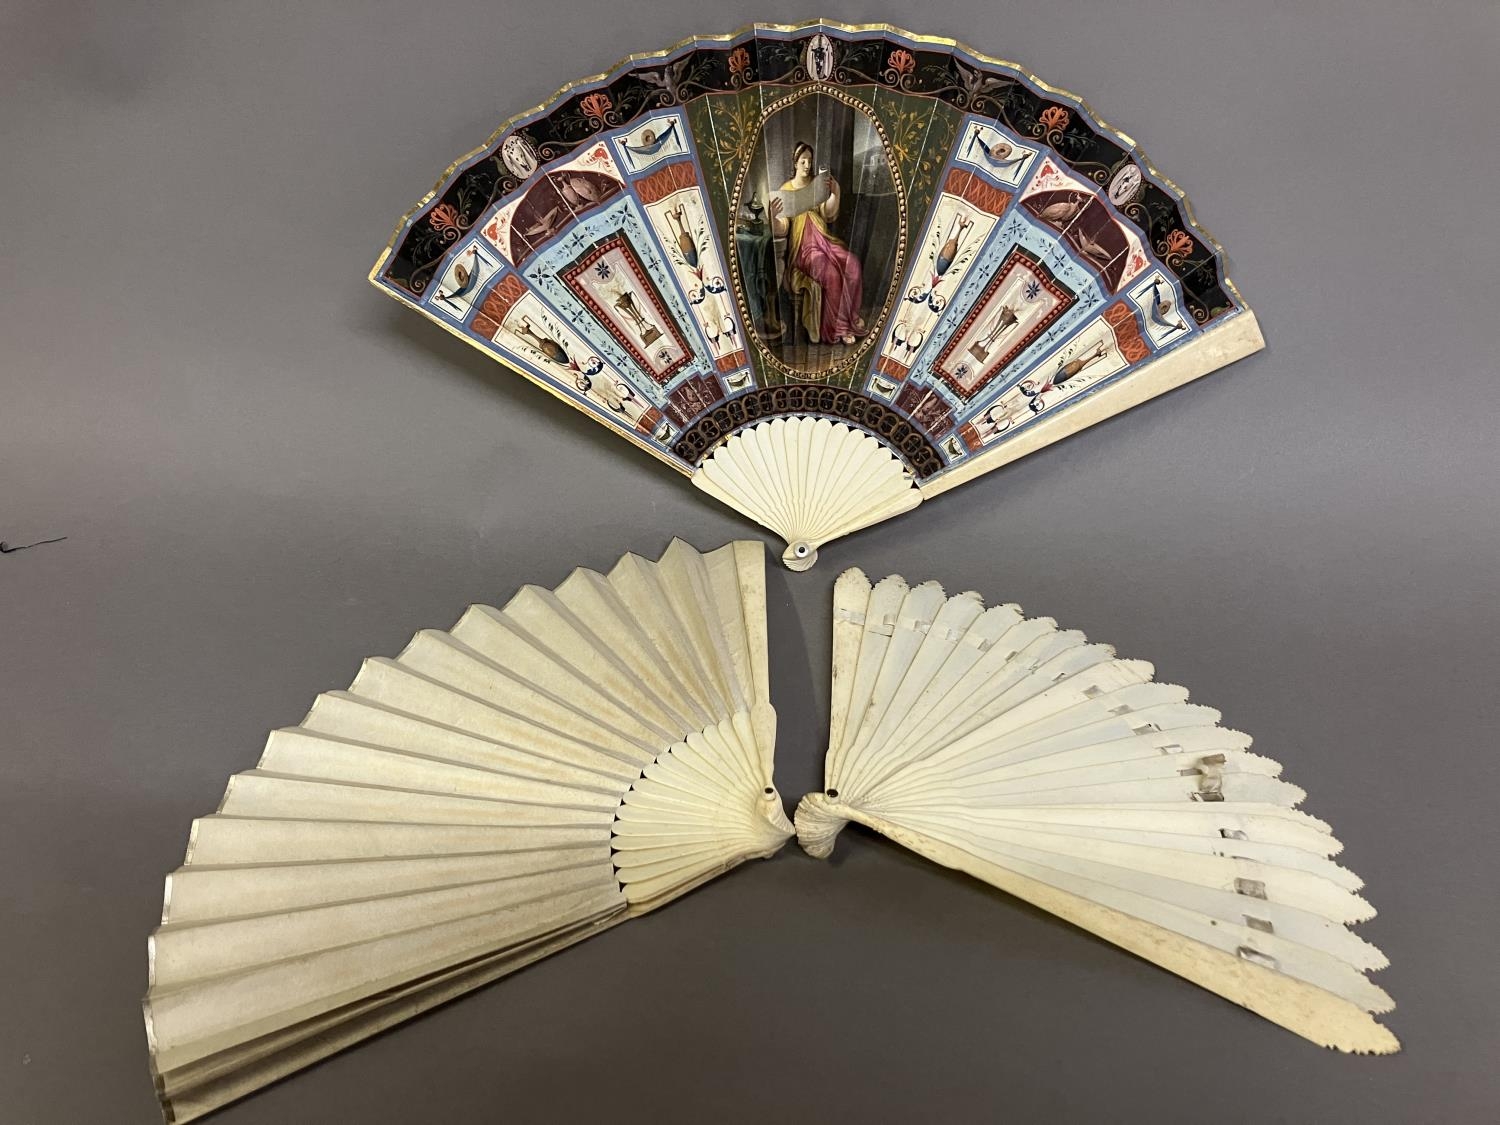 Early 19th century fans: a very classical bone fan in the Grand Tour style, c 1830’s, the double